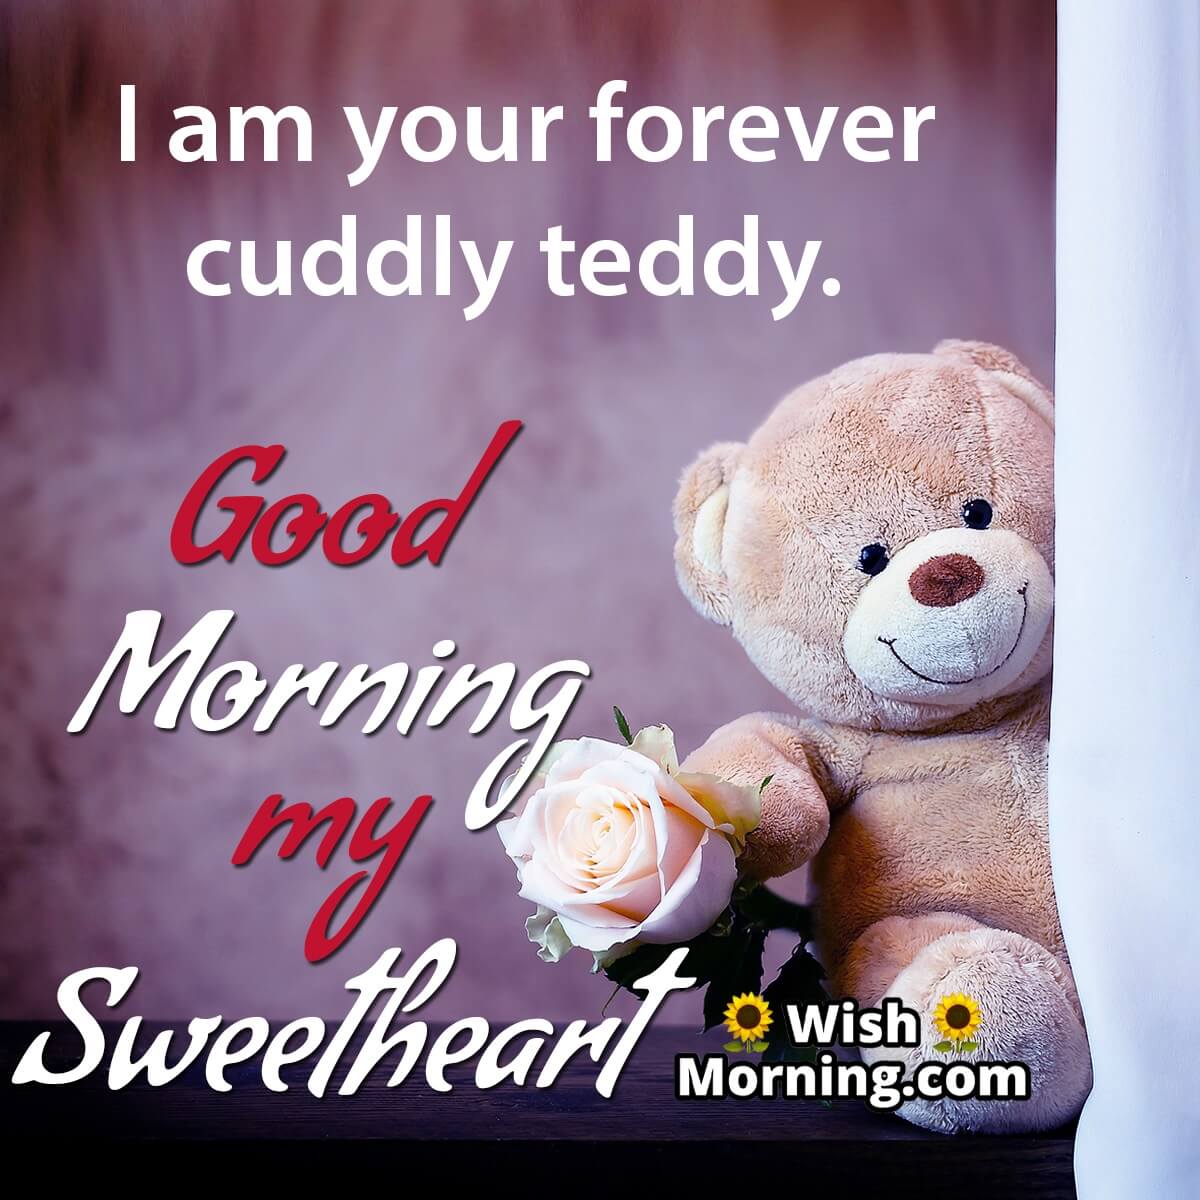 Good Morning Teddy Message For Girlfriend